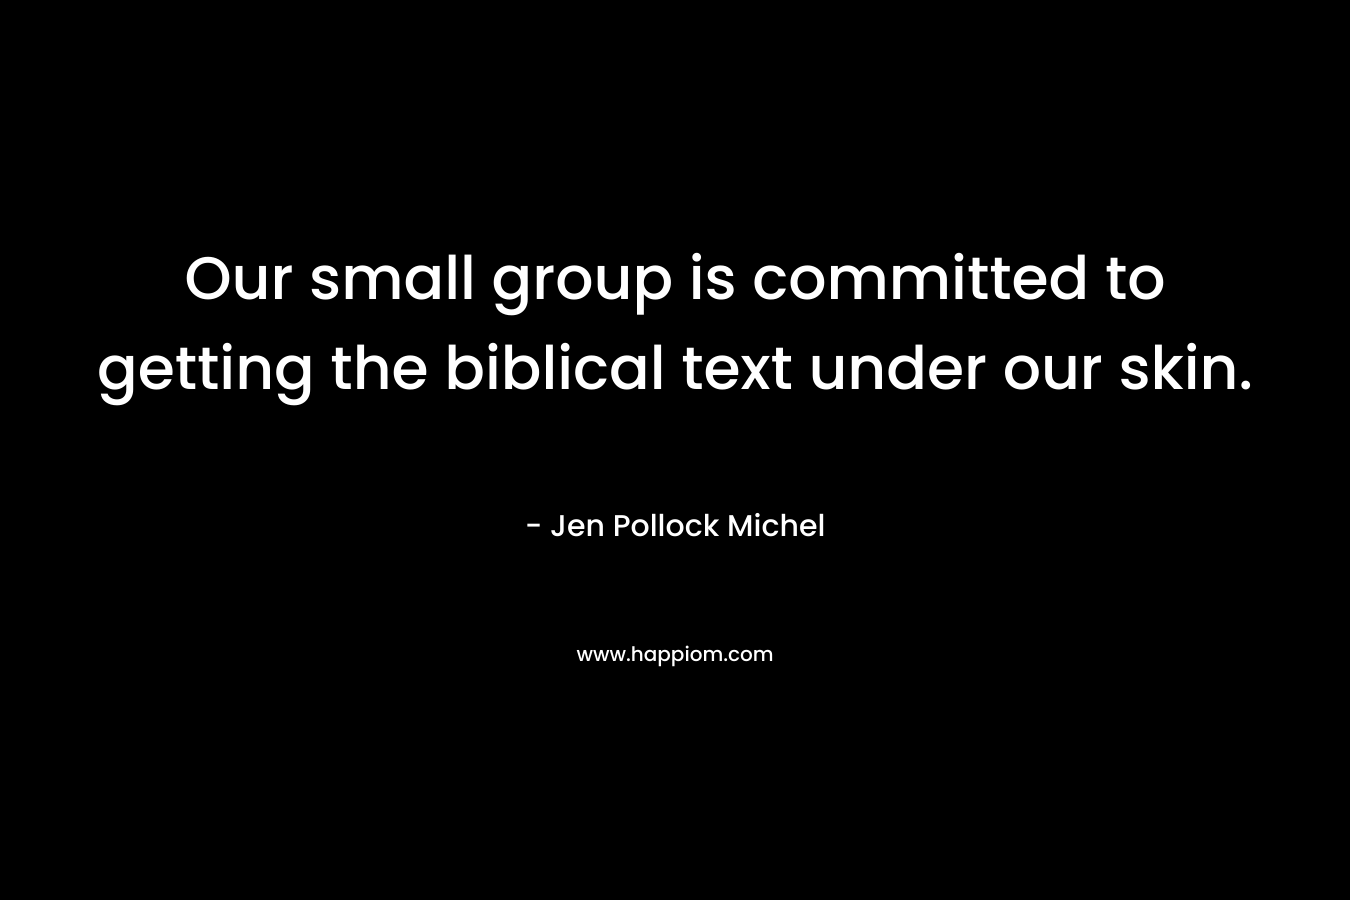 Our small group is committed to getting the biblical text under our skin. – Jen Pollock Michel